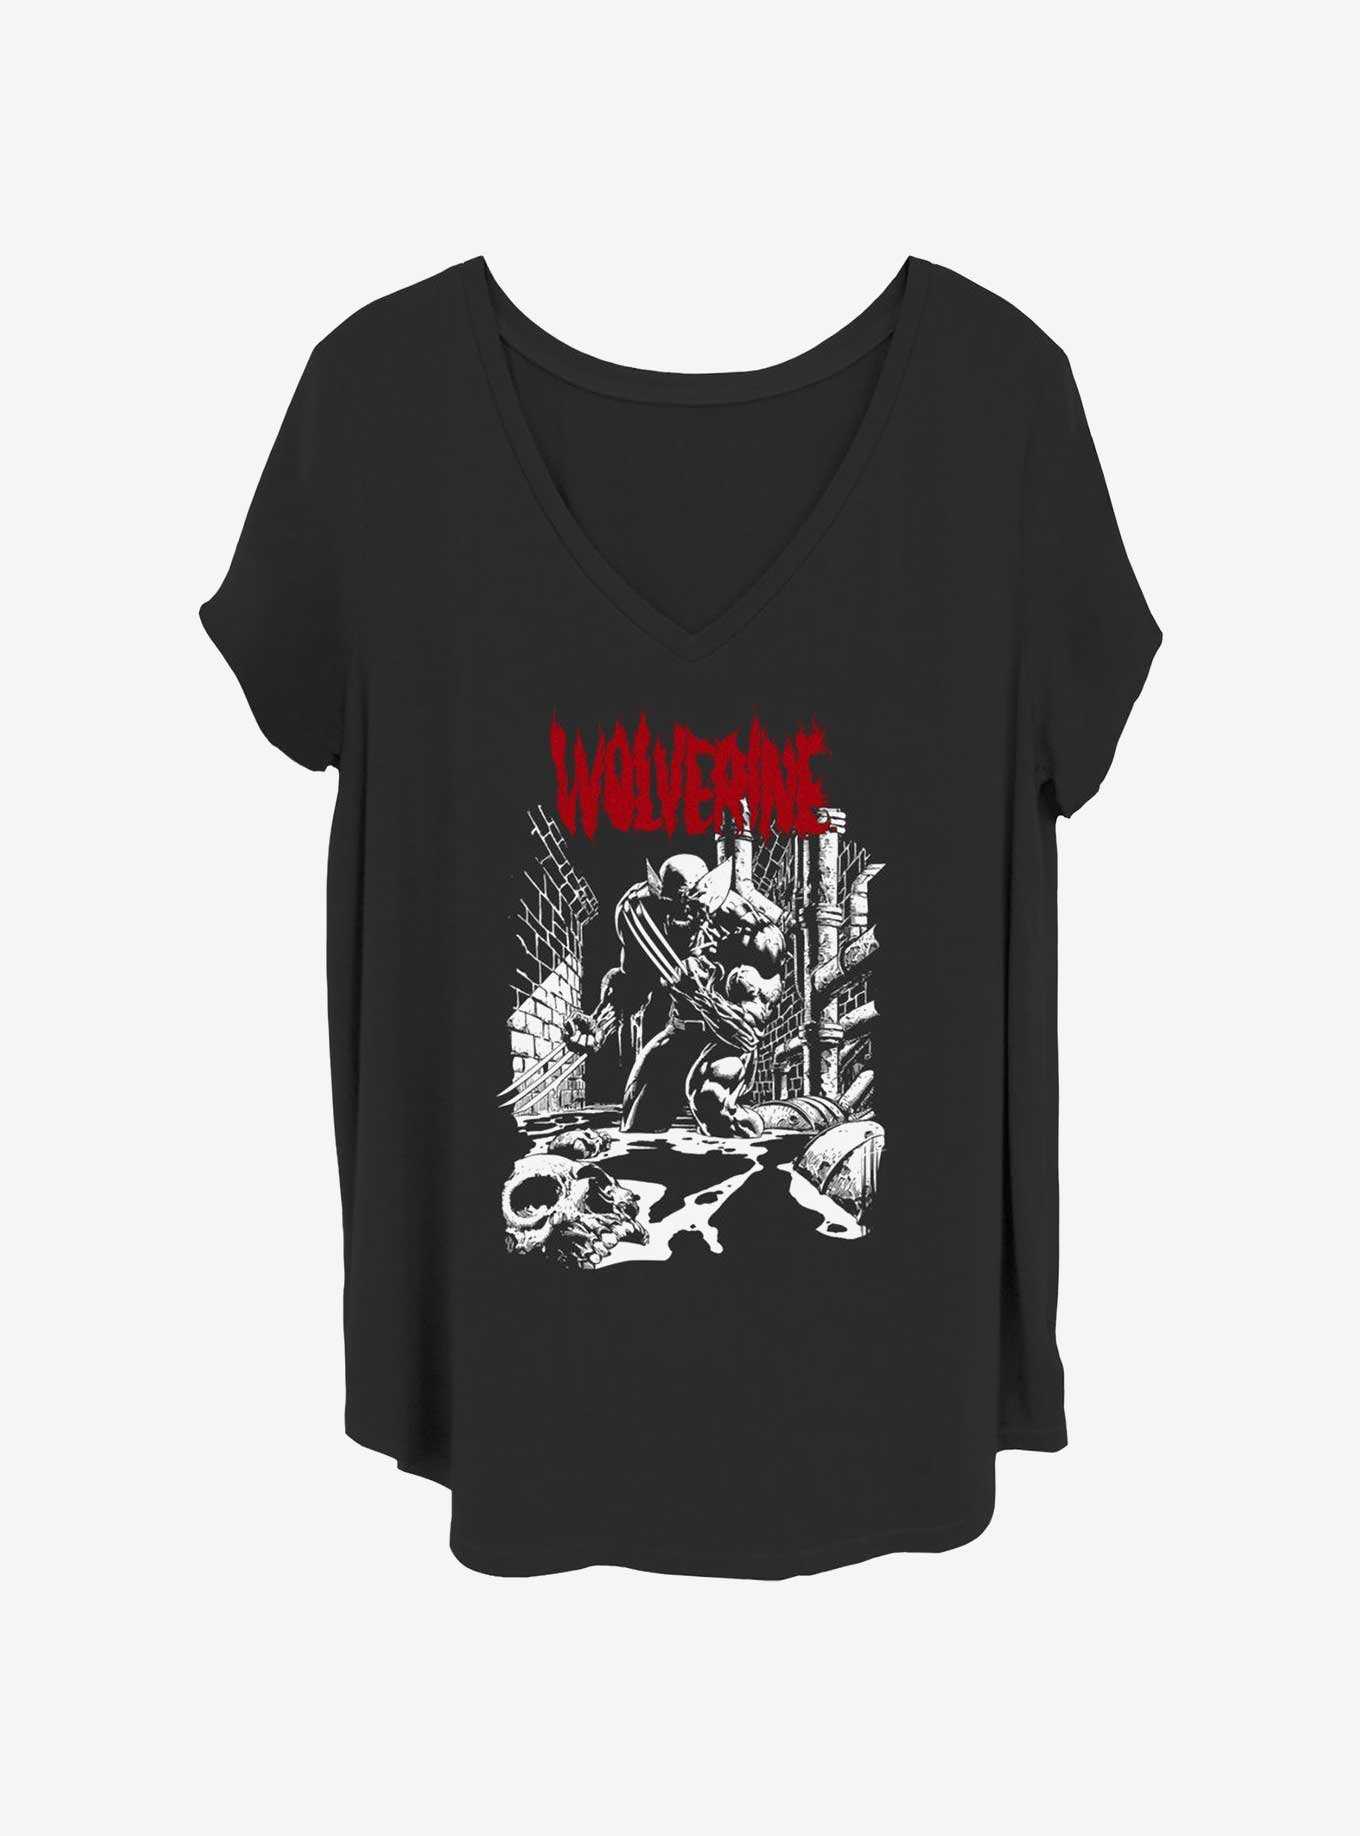 Wolverine Under The Streets Girls T-Shirt Plus Size, , hi-res